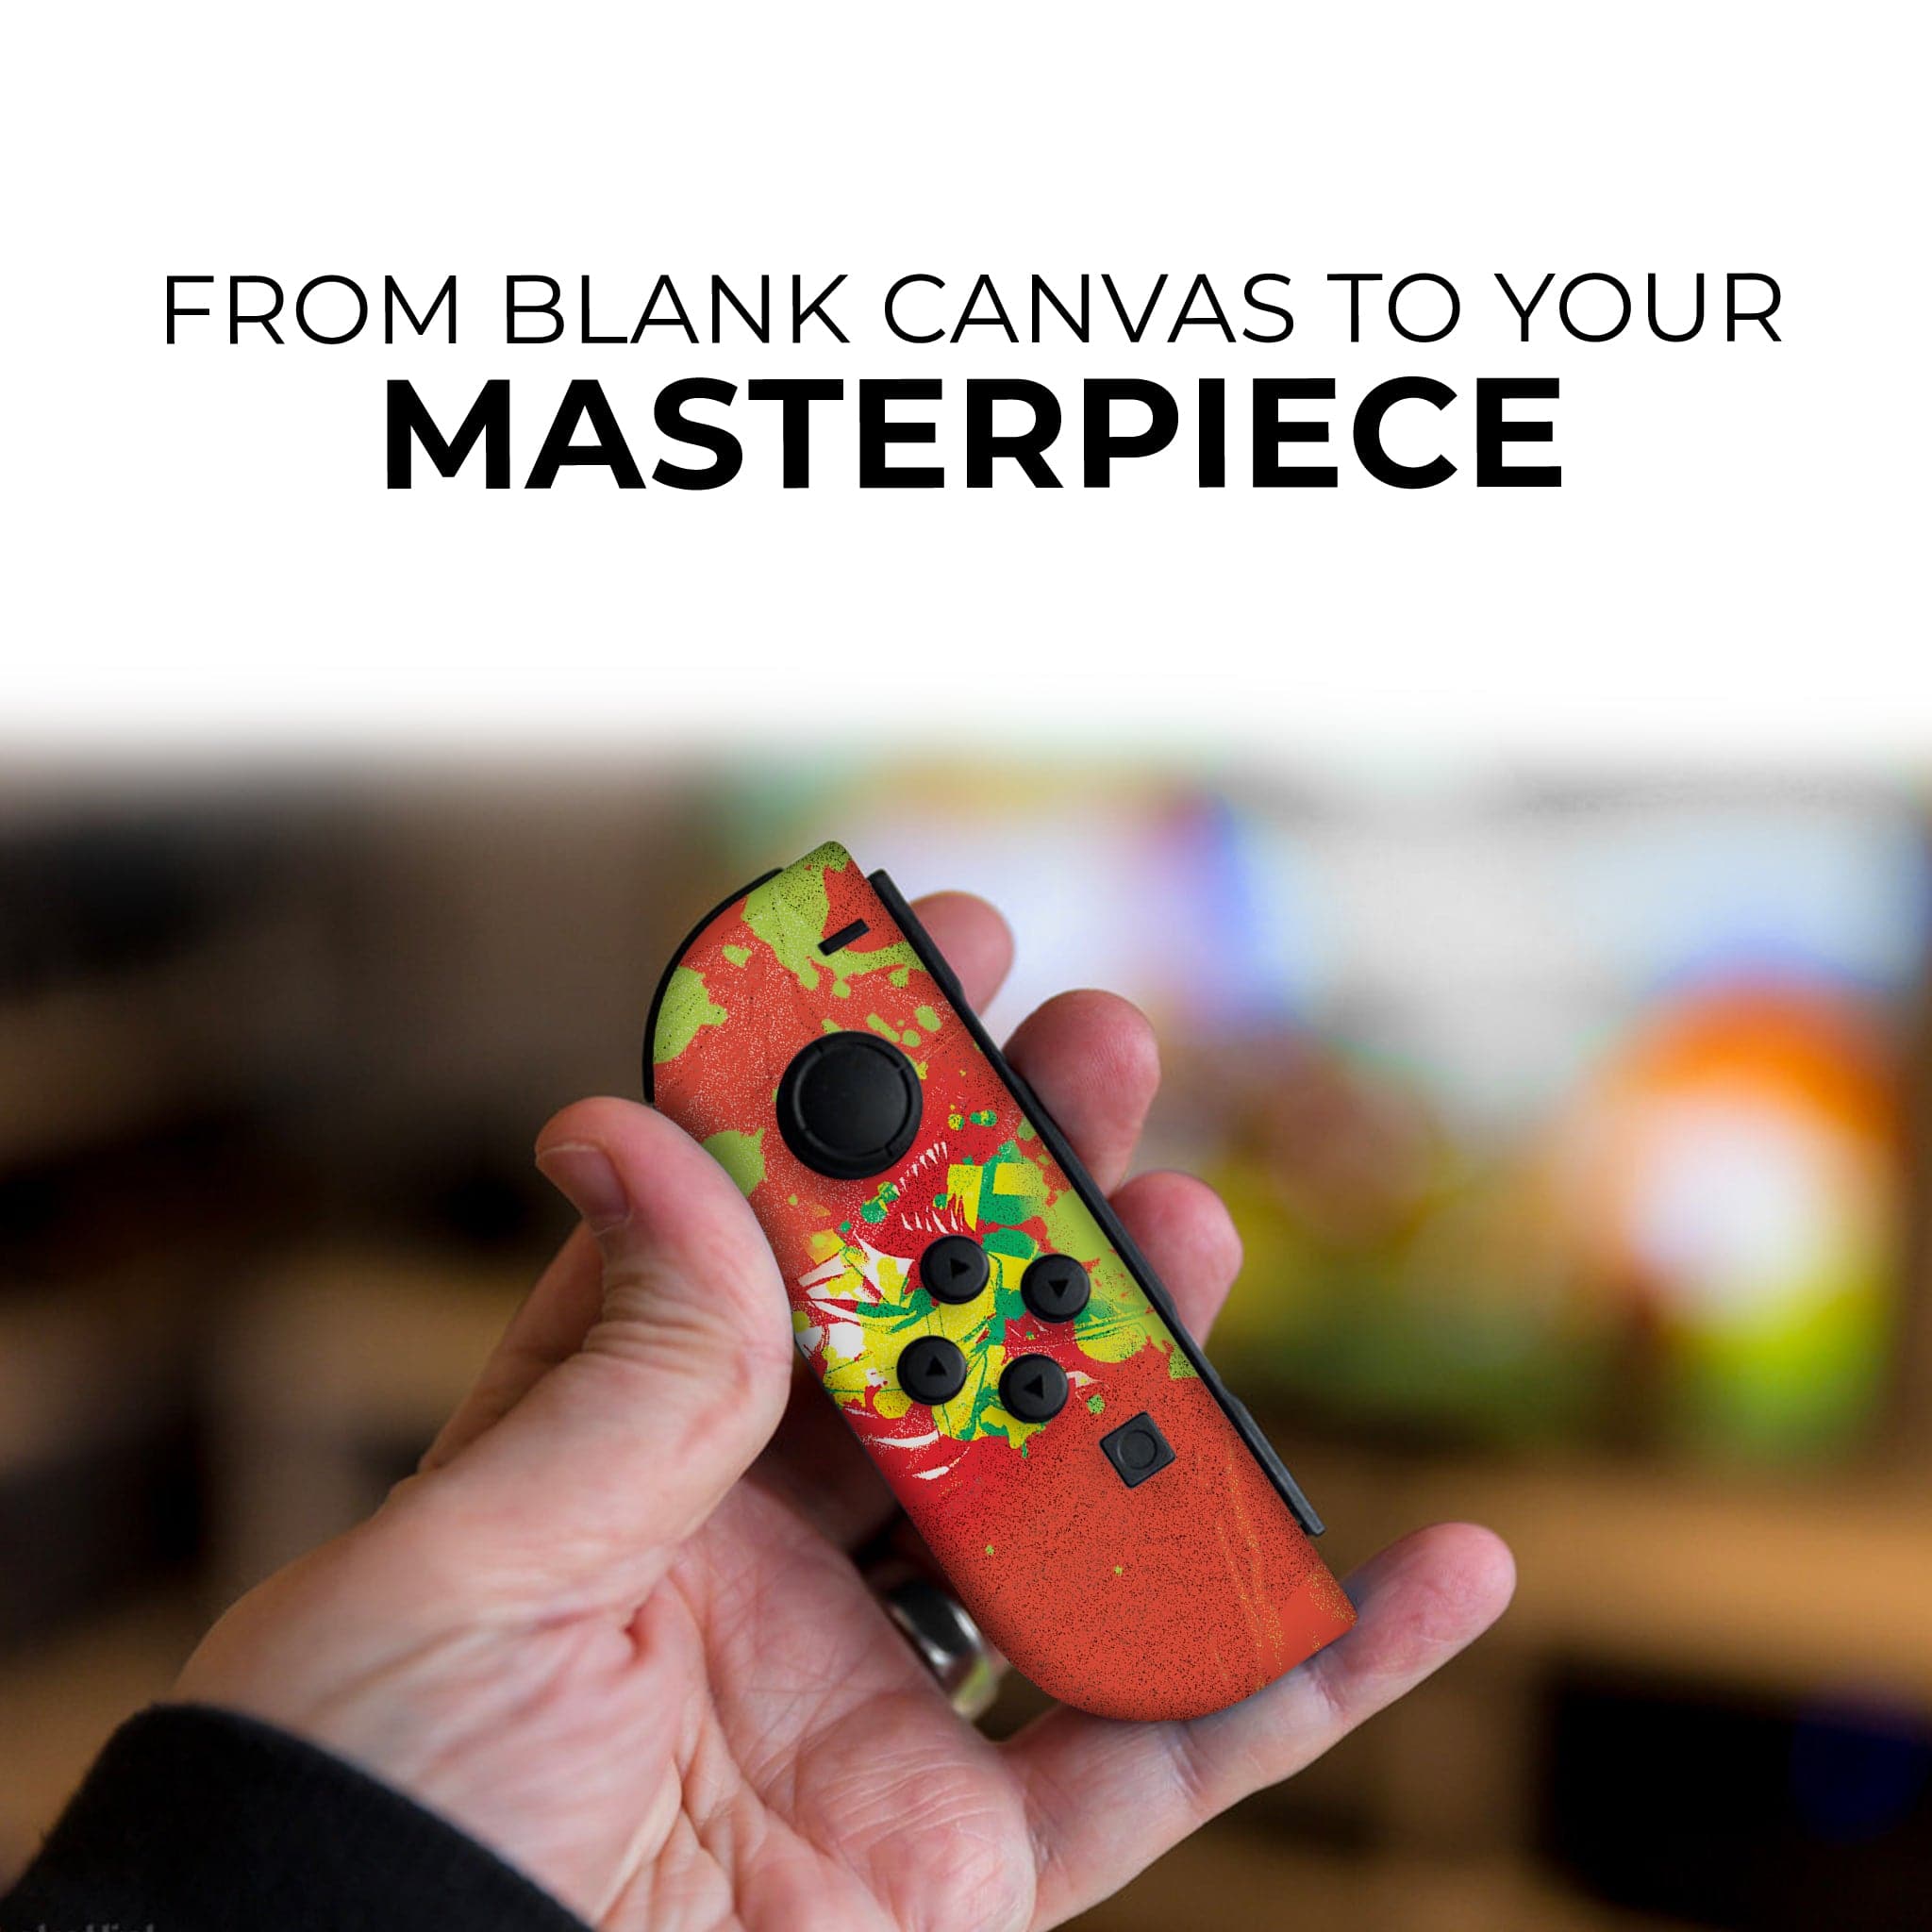 Chainsaw Man Inspired Nintendo Switch Controllers